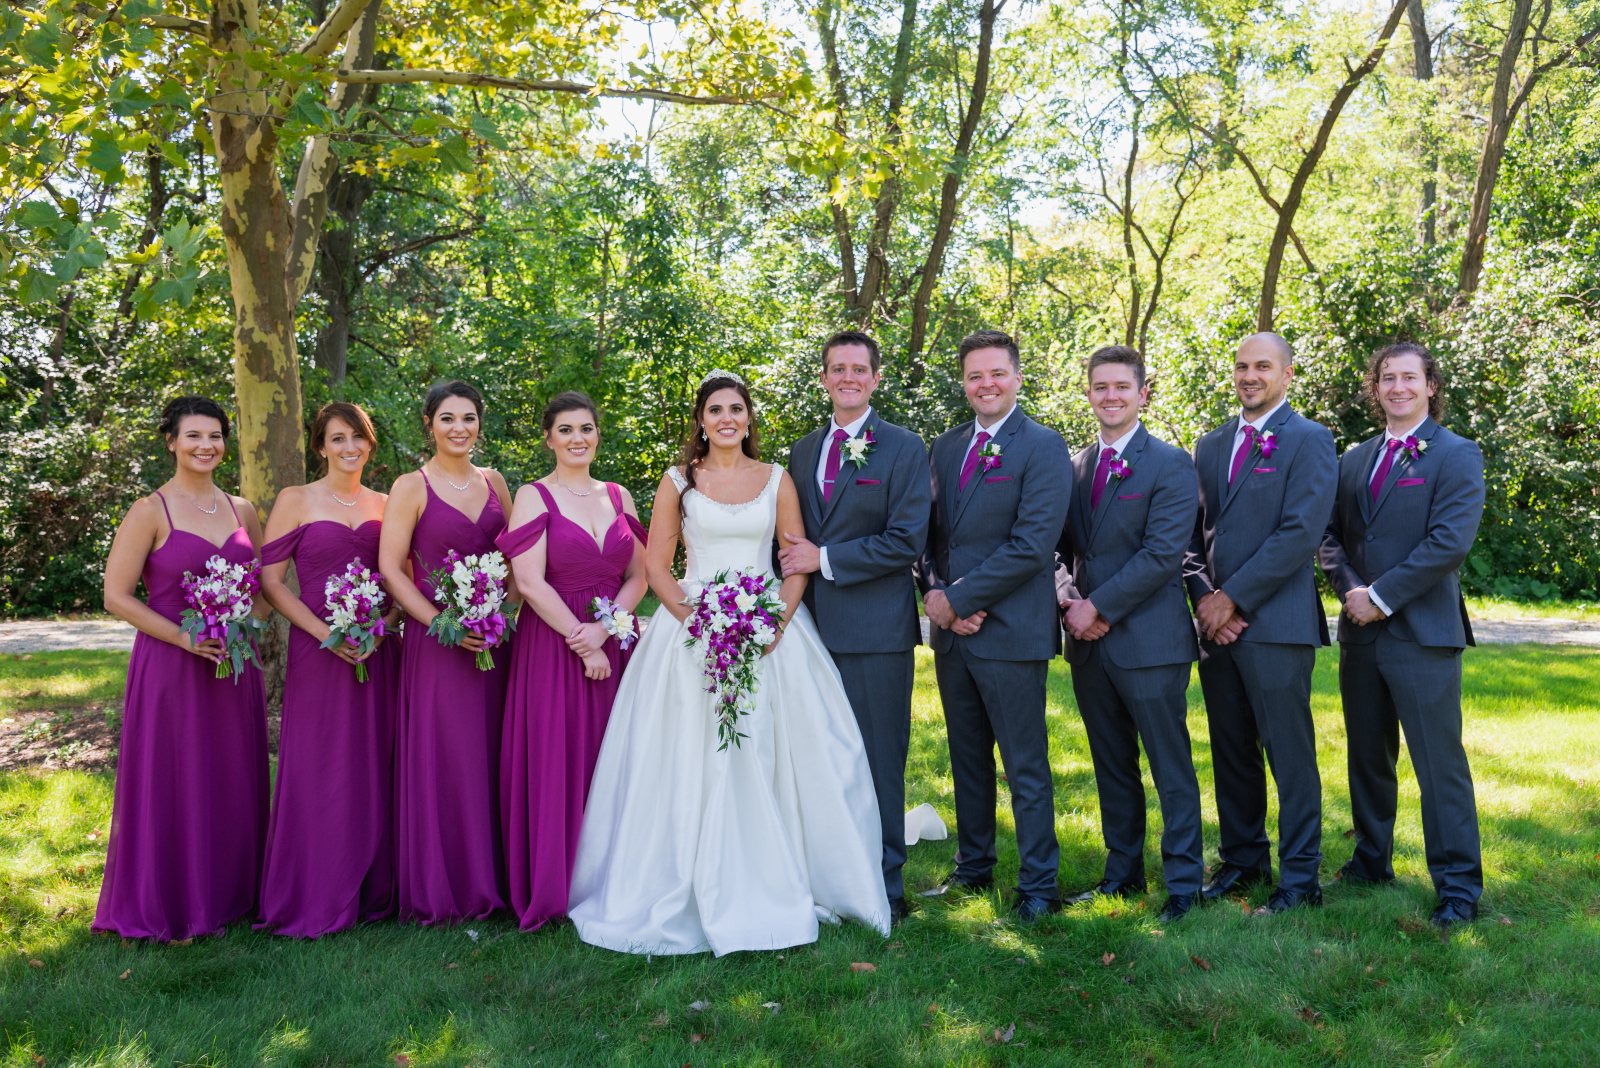 Bride and groom with bridal party, bridal party portrait, green, trees, nature, sweet wedding ceremony at Crocker Park, Westlake OH